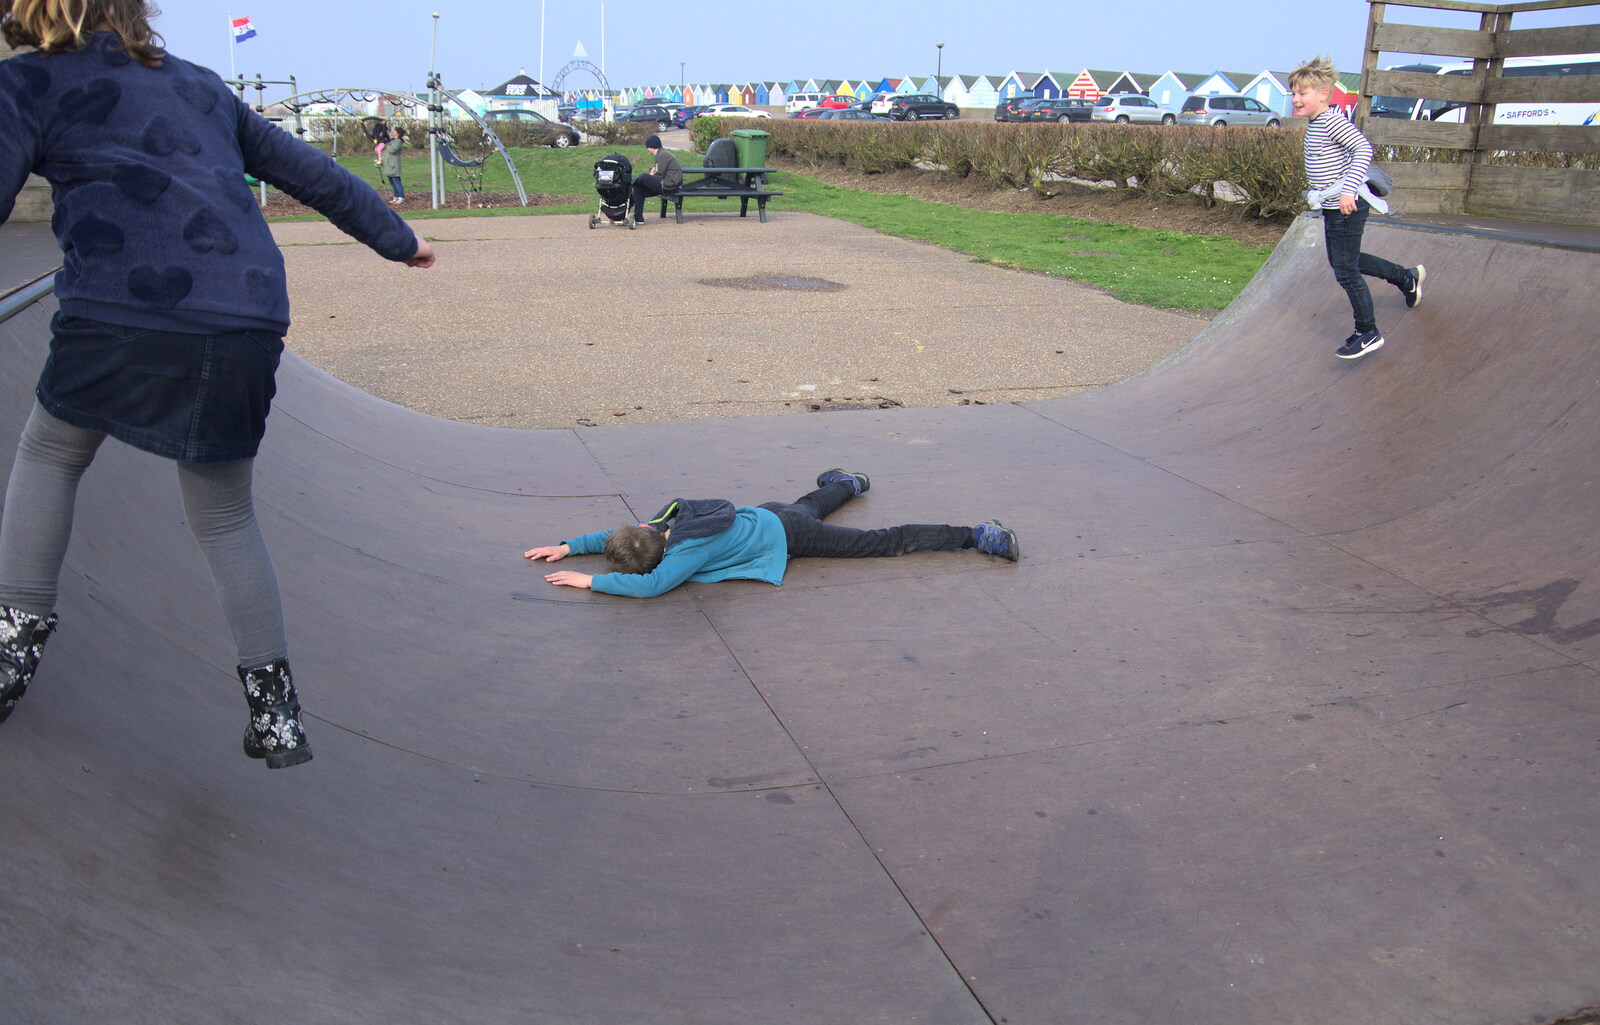 Fred's flaked out on the skate ramp from On The Beach, Southwold, Suffolk - 7th April 2019